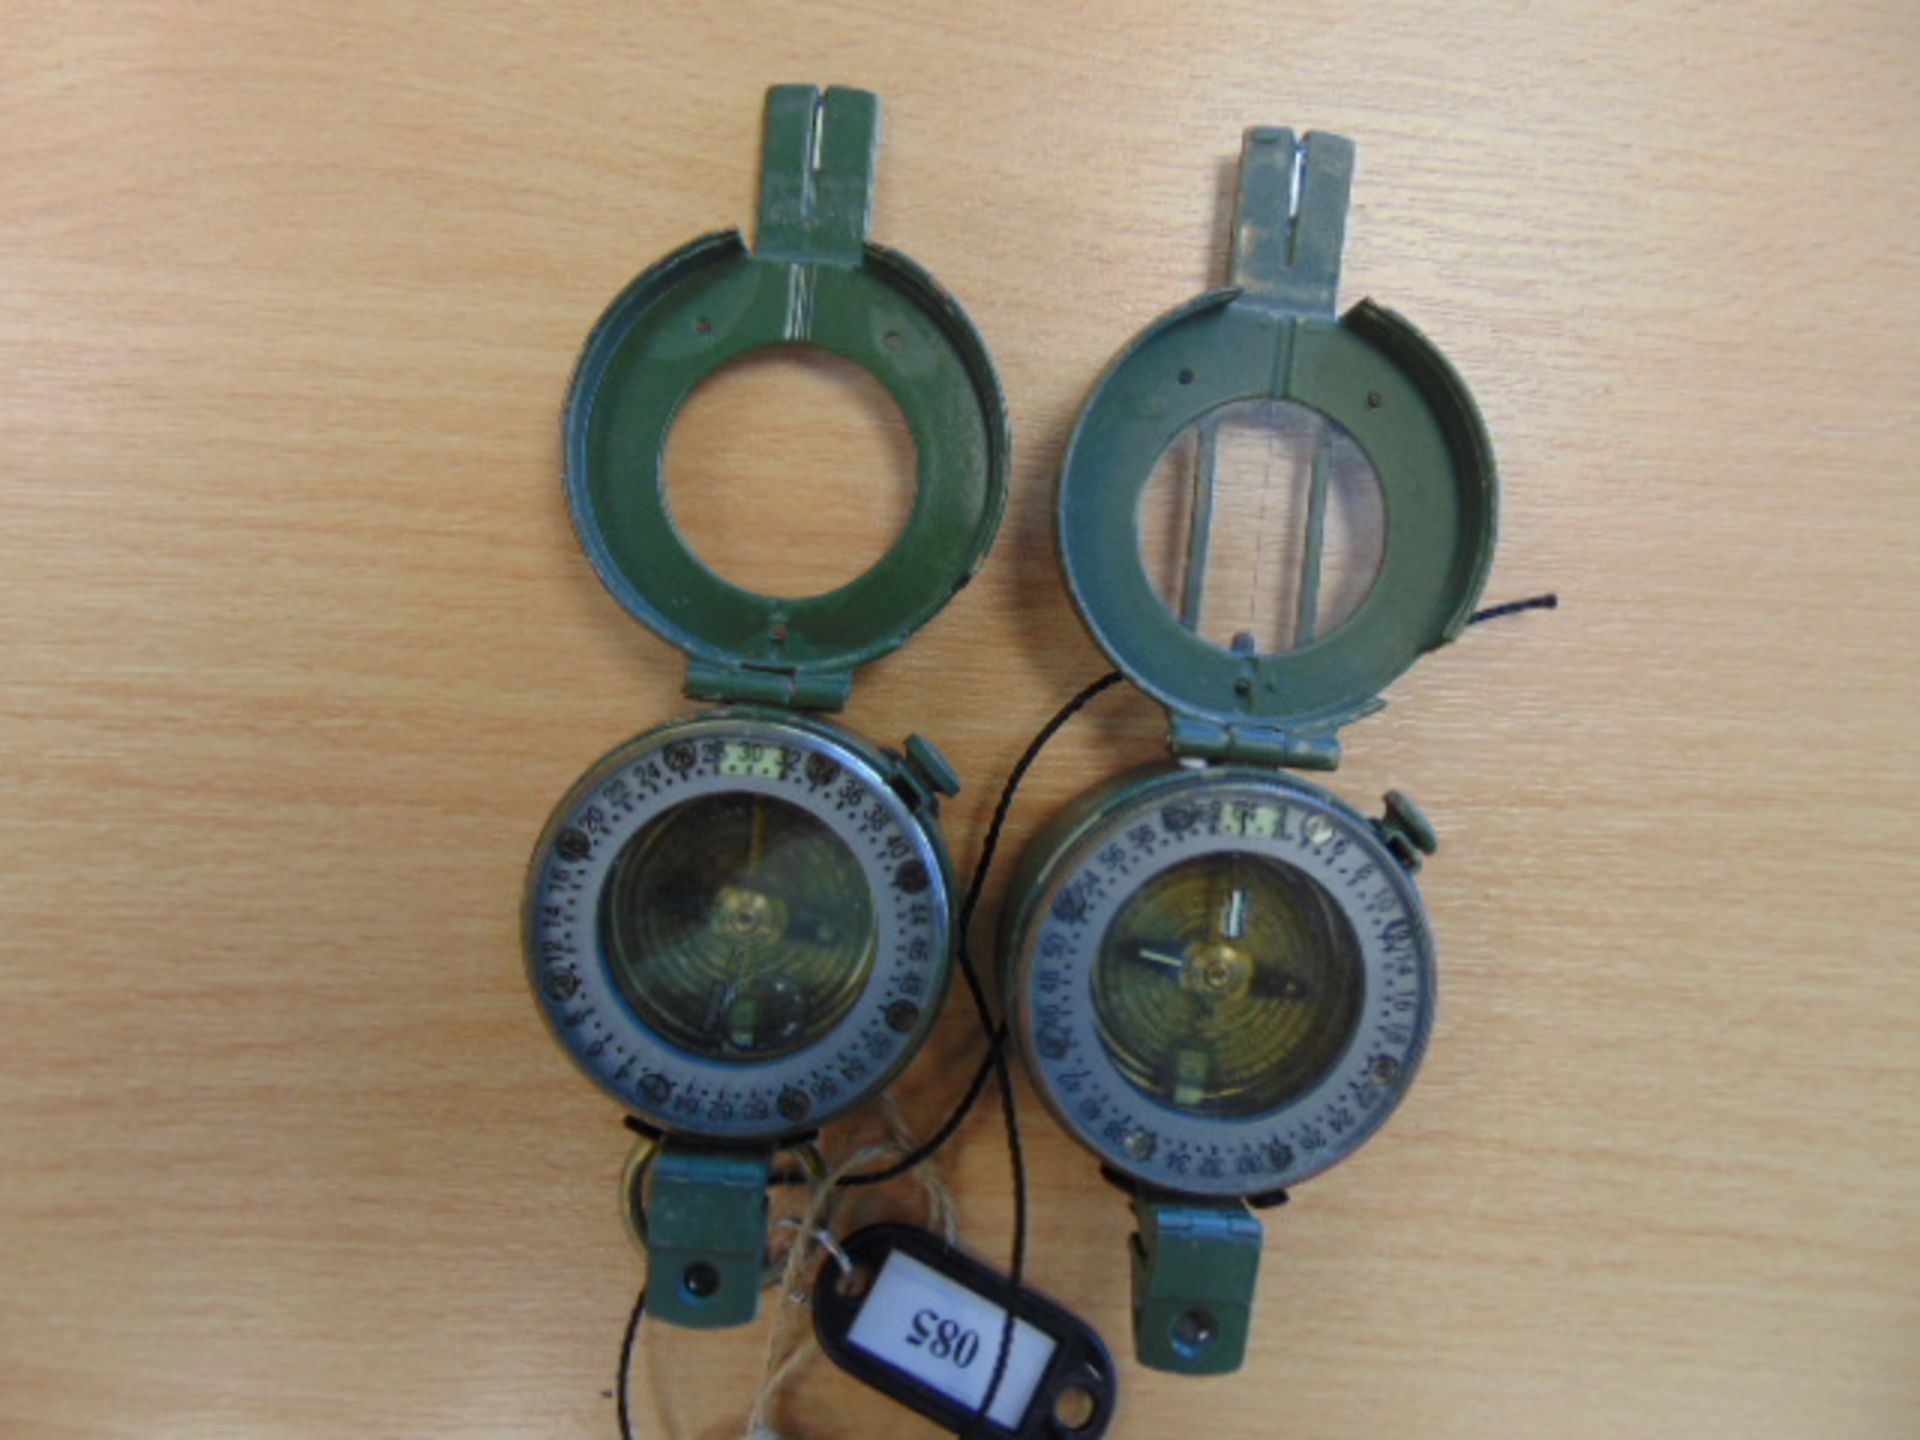 2 x Stanley London British Army Prismatic Compass in Mils, Made in UK - Image 2 of 3